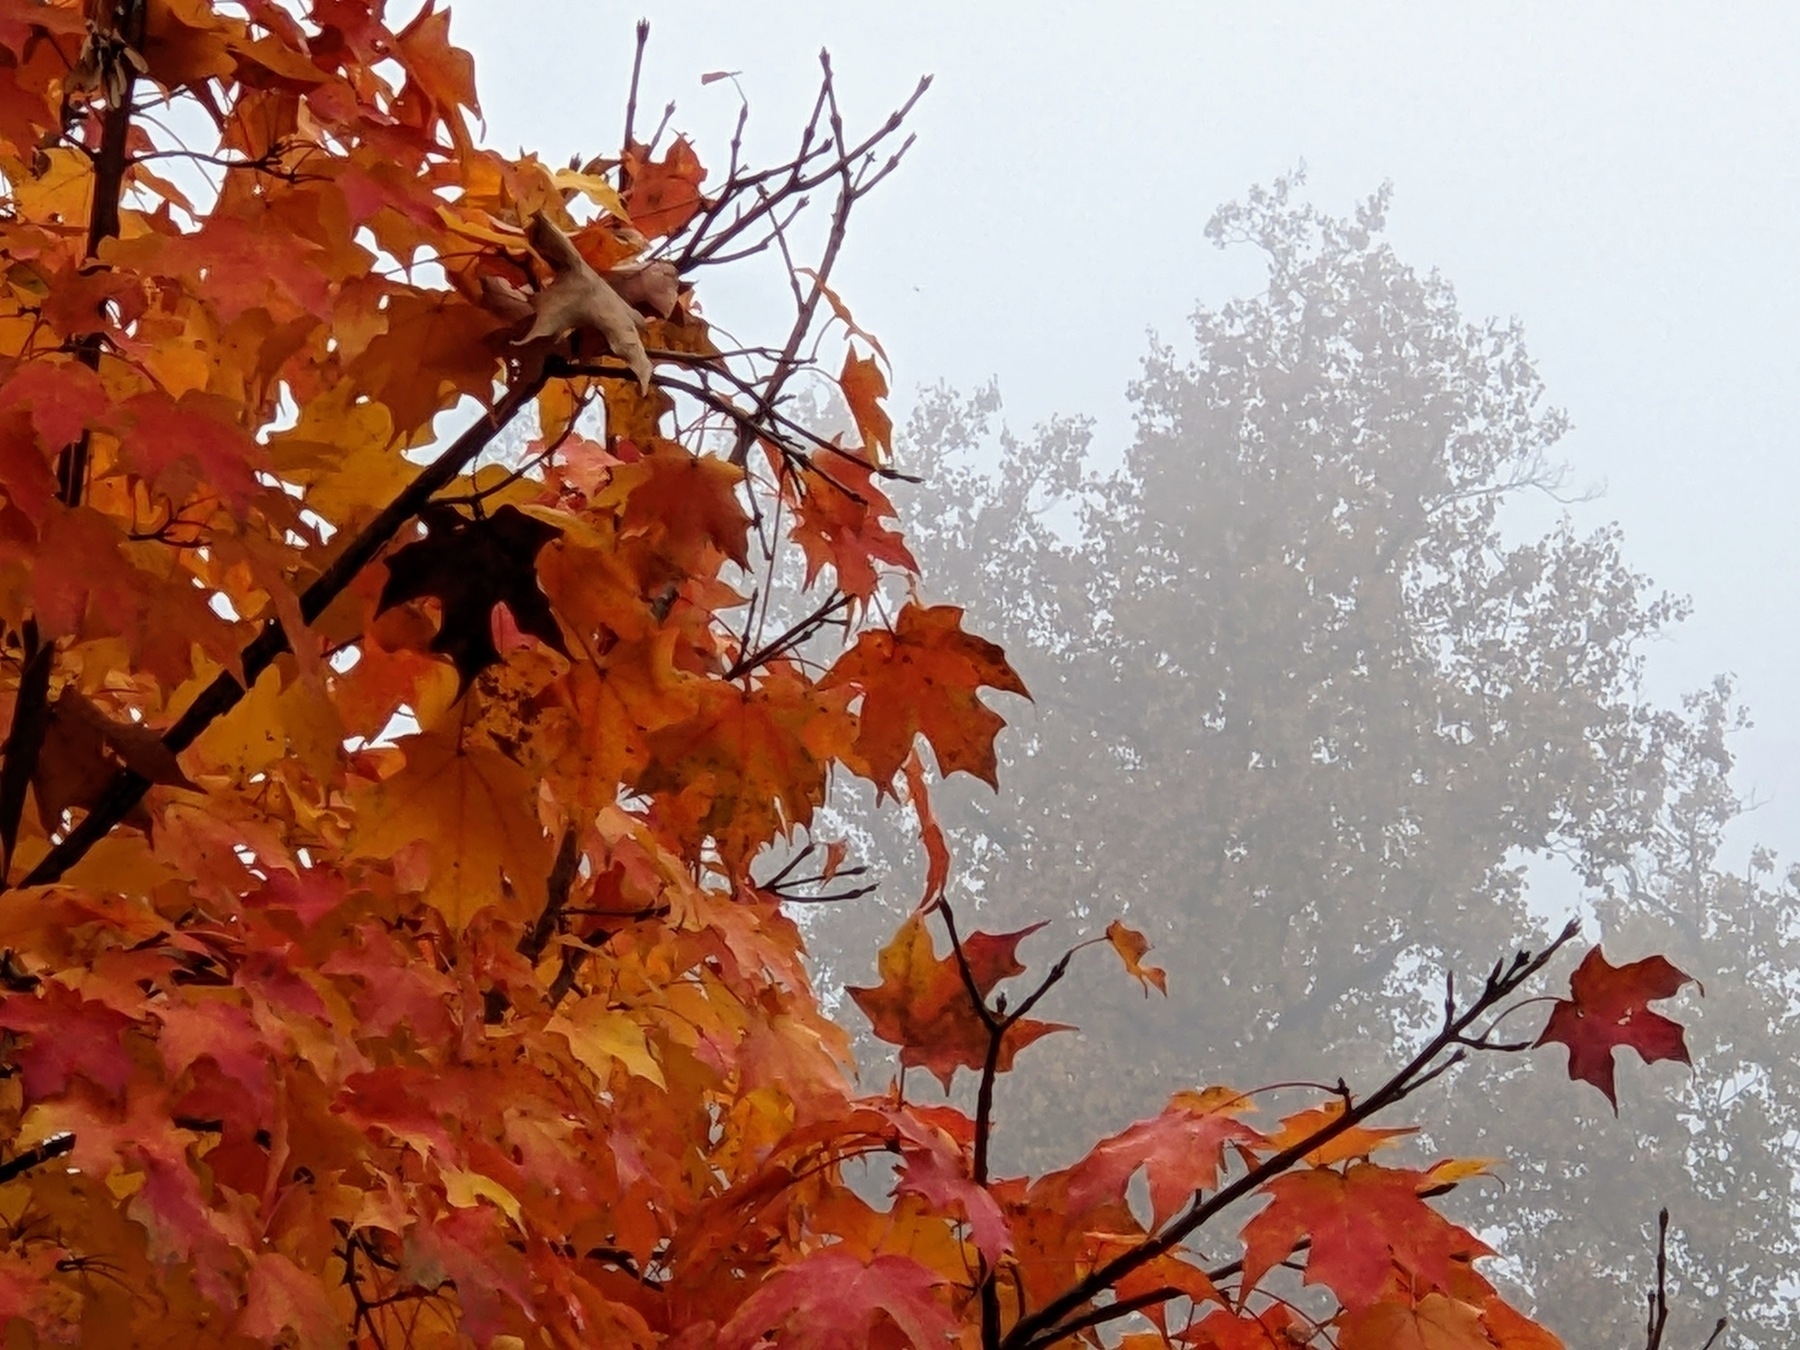 orange and red leaves on sugar maple in foreground, silhouette of another tree, partially hidden by mist, in the background